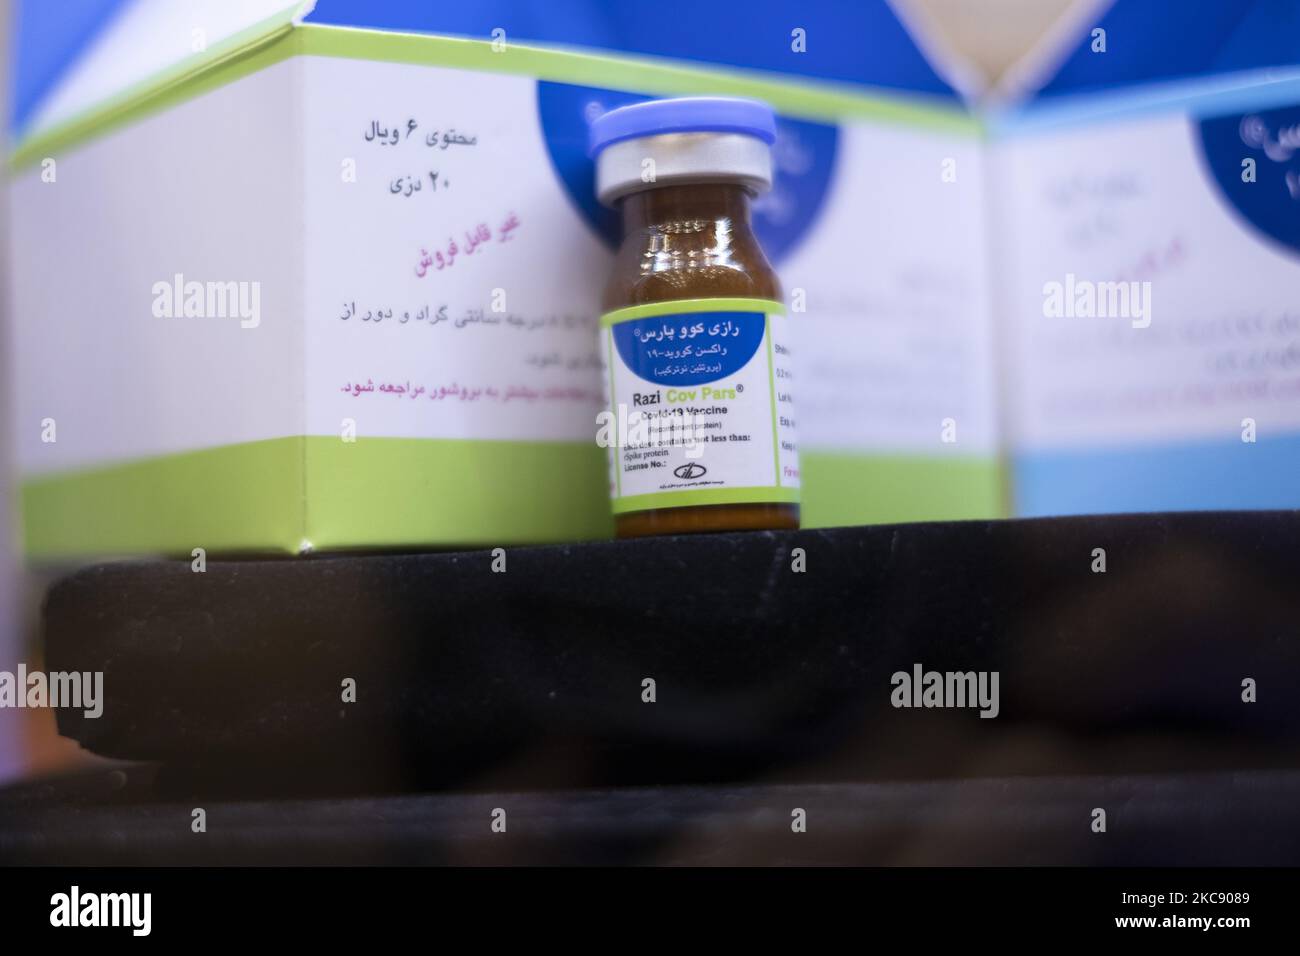 The first Intramuscular-Intranasal Recombinant Protein COVID-19 Vaccine, COV-Pars, is pictured during a ceremony for unveiling of the first Iran-made COVID-19 vaccine in the Razi Vaccine and Serum Research Institute in the city of Karaj in Alborz Province 53Km (33 miles) west of Tehran, February 8, 2021. (Photo by Morteza Nikoubazl/NurPhoto) Stock Photo